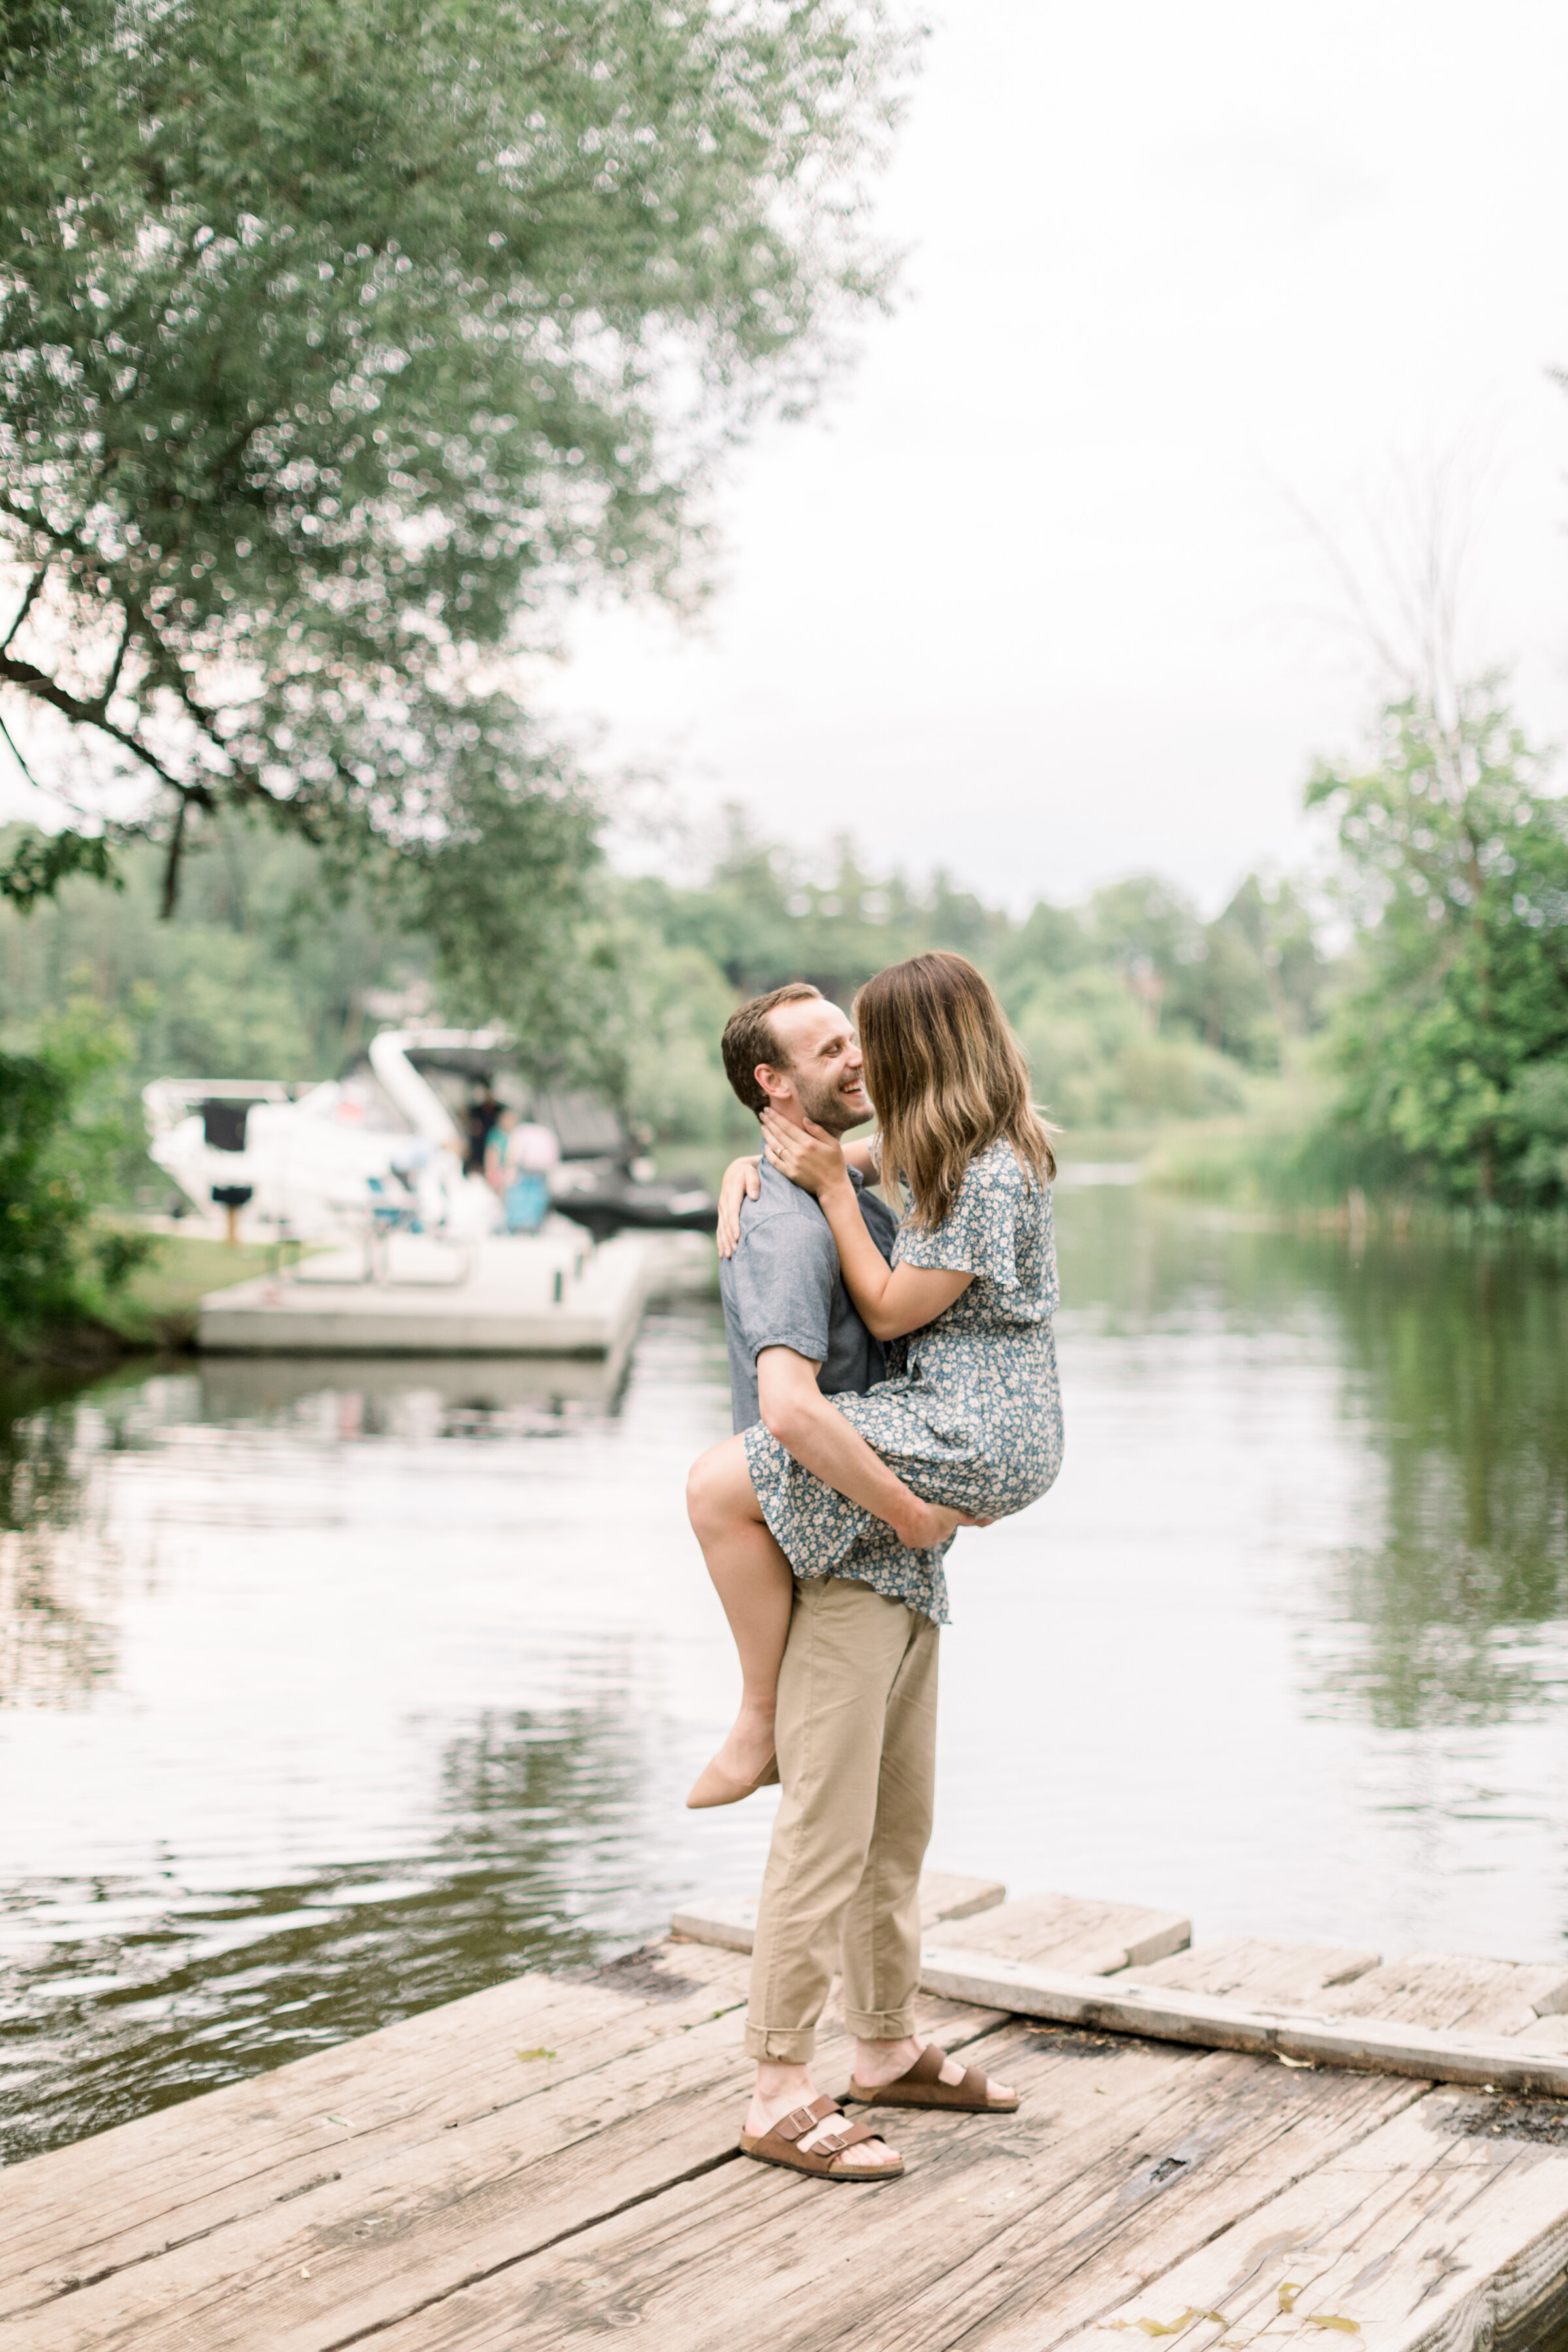  Cute pose with guy holding girl on bride with lake and boat in the background for posing inspo in Ottawa ,ON by Chelsea Mason Photography. pose inspo for engagements best poses for engagements how to pose for engagements lake locations for photoshoo